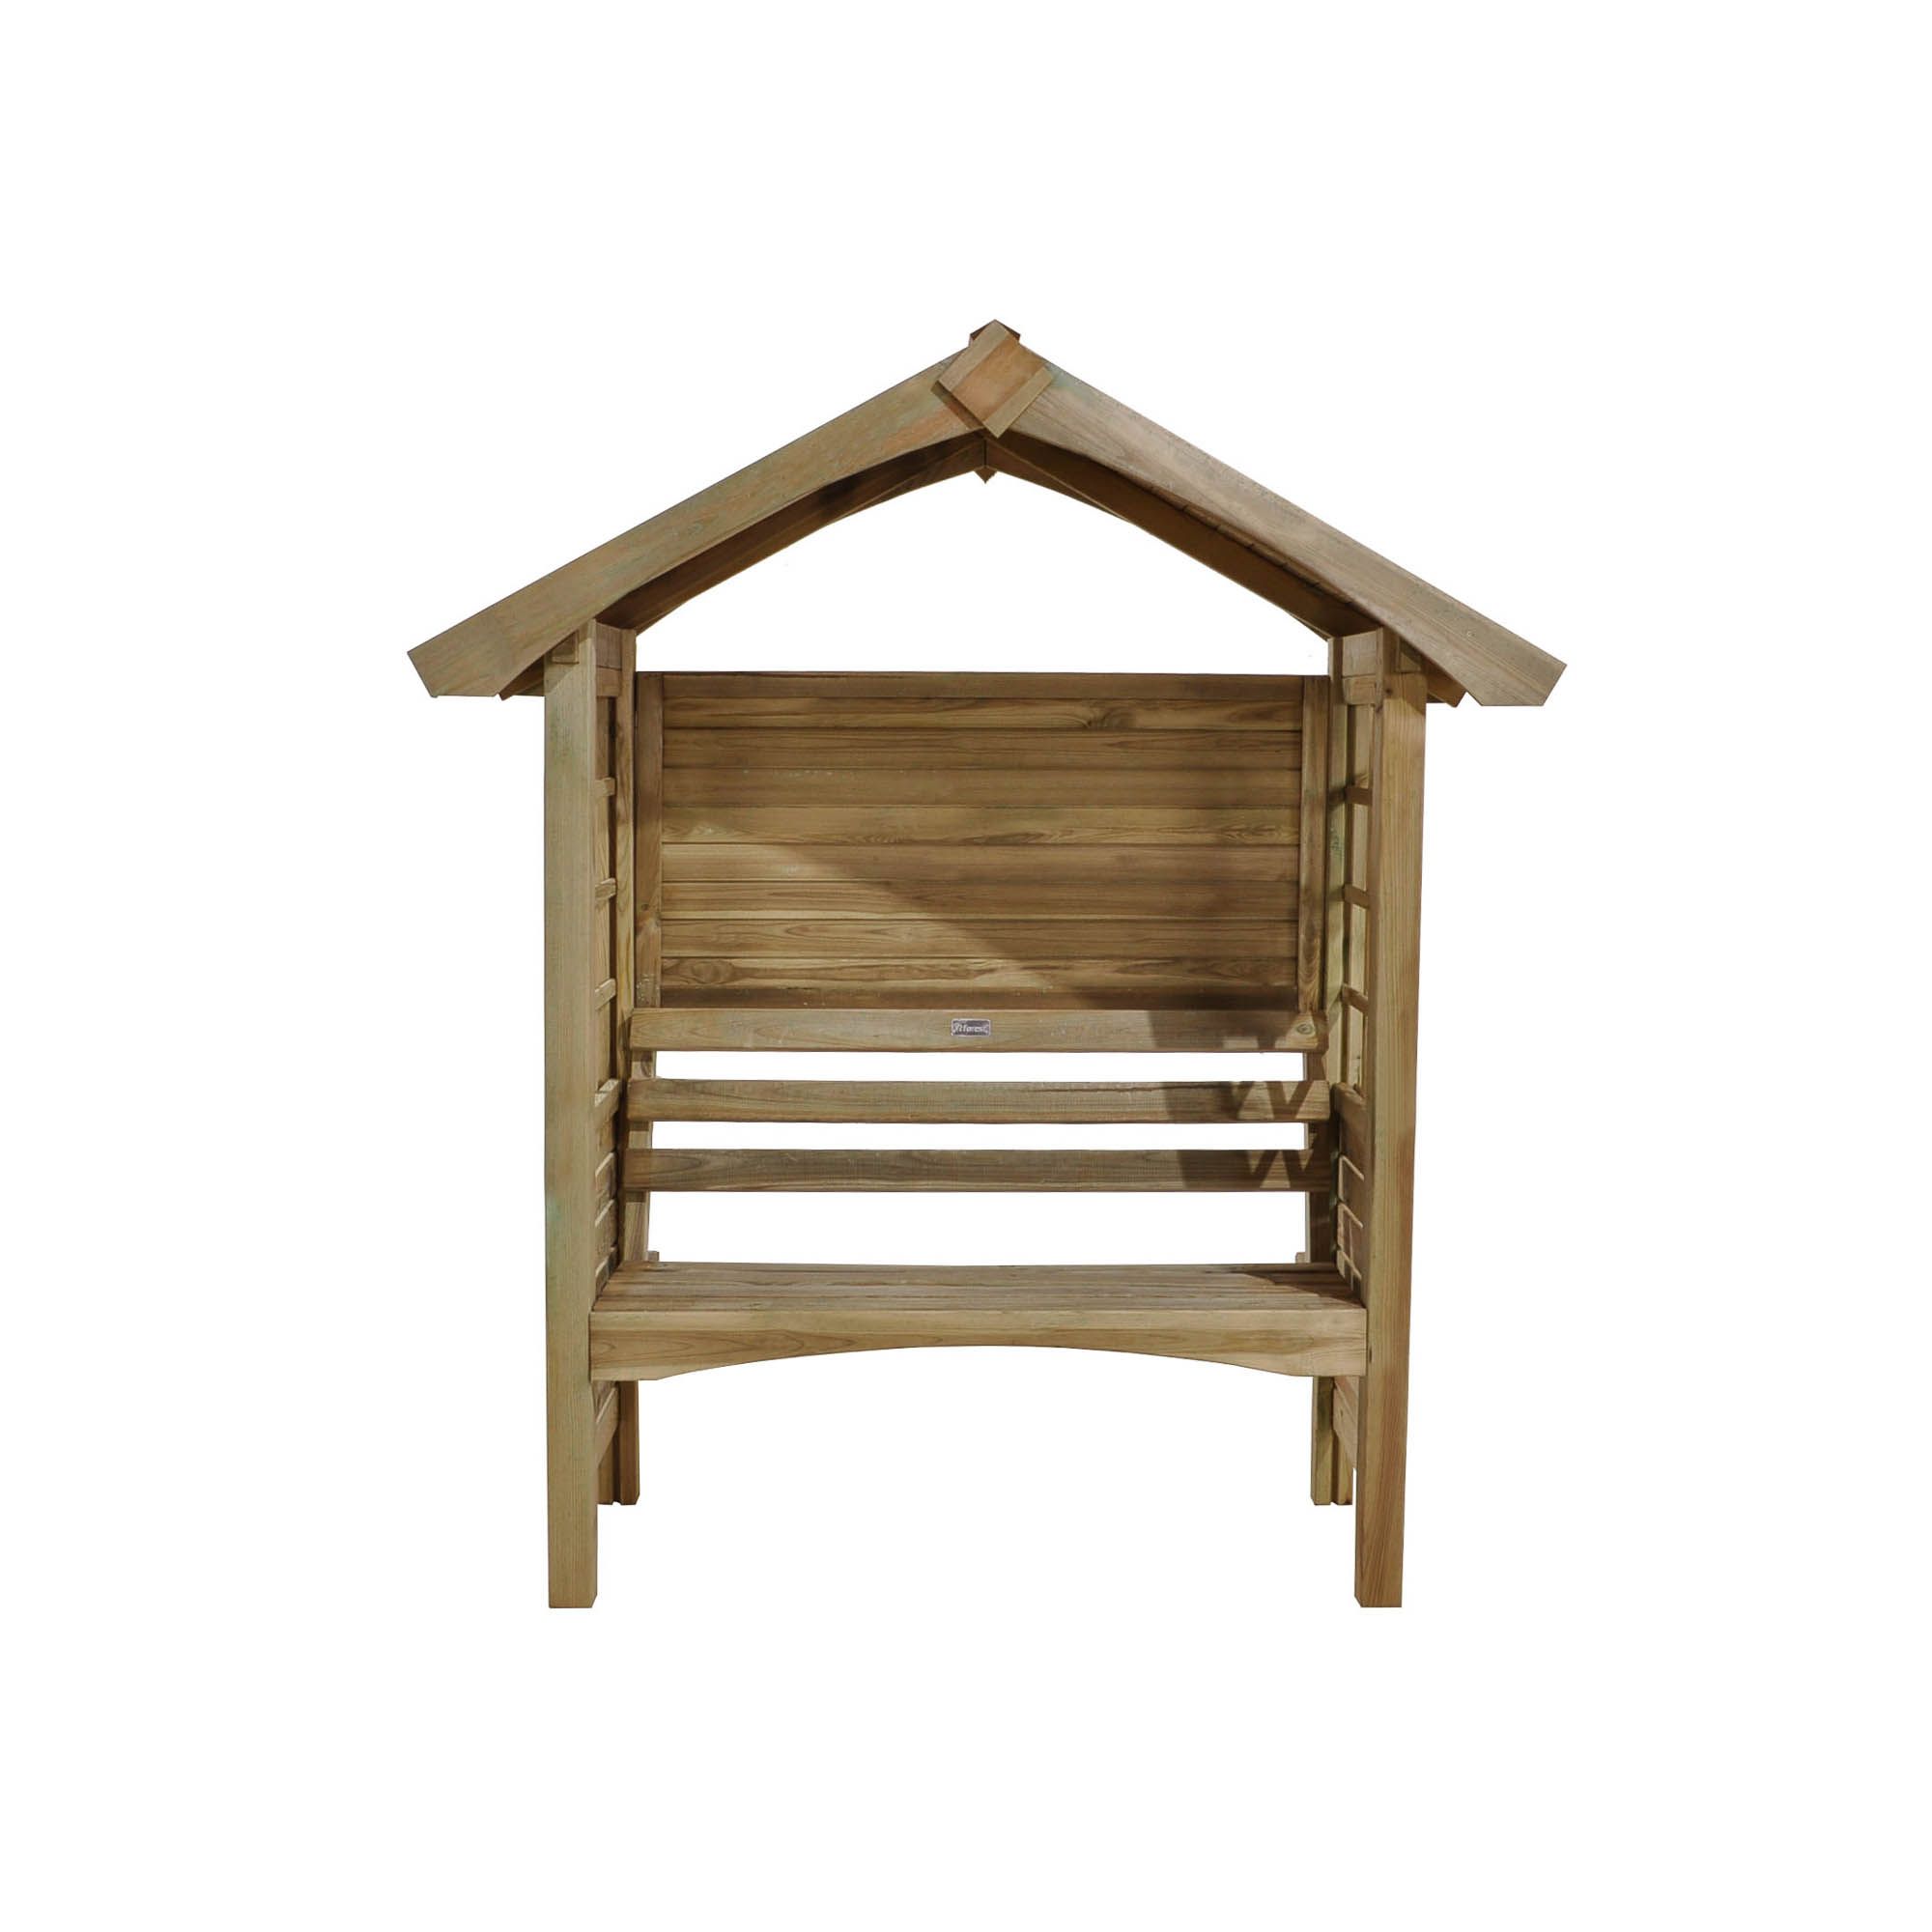 Forest Garden Cadiz Arbour, (H)1970mm (W)1690mm (D)730mm - Assembly required